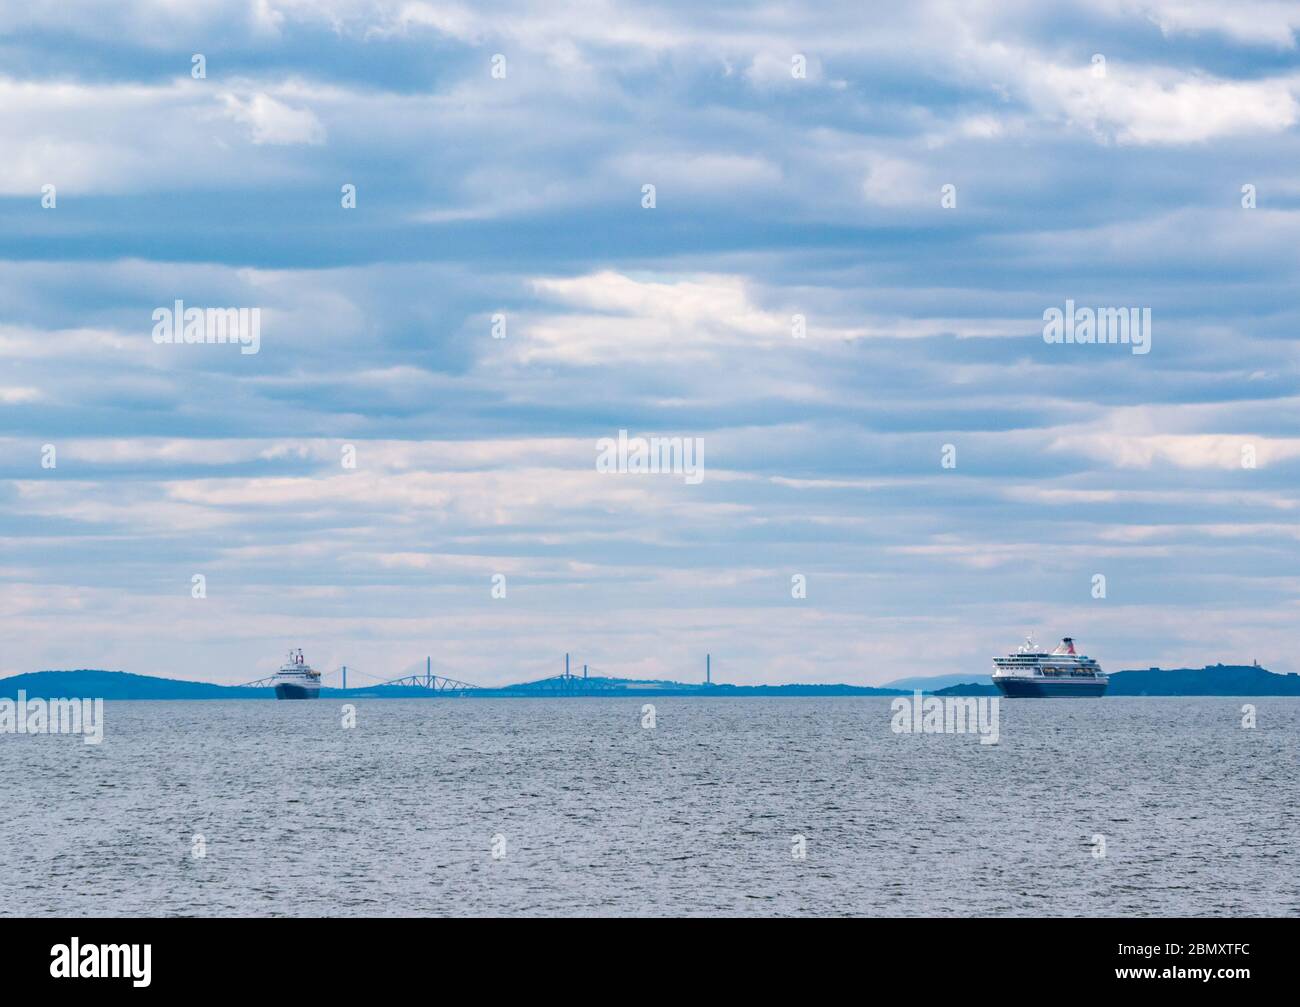 East Lothian, Scotland, United Kingdom, 11th may 2020. UK Weather: Quiet at the reserve during the Covid-19 lockdown with Fred Olsen mothballed out of service cruise ships anchored seen in the Firth of Forth and the three bridges in the distance Stock Photo